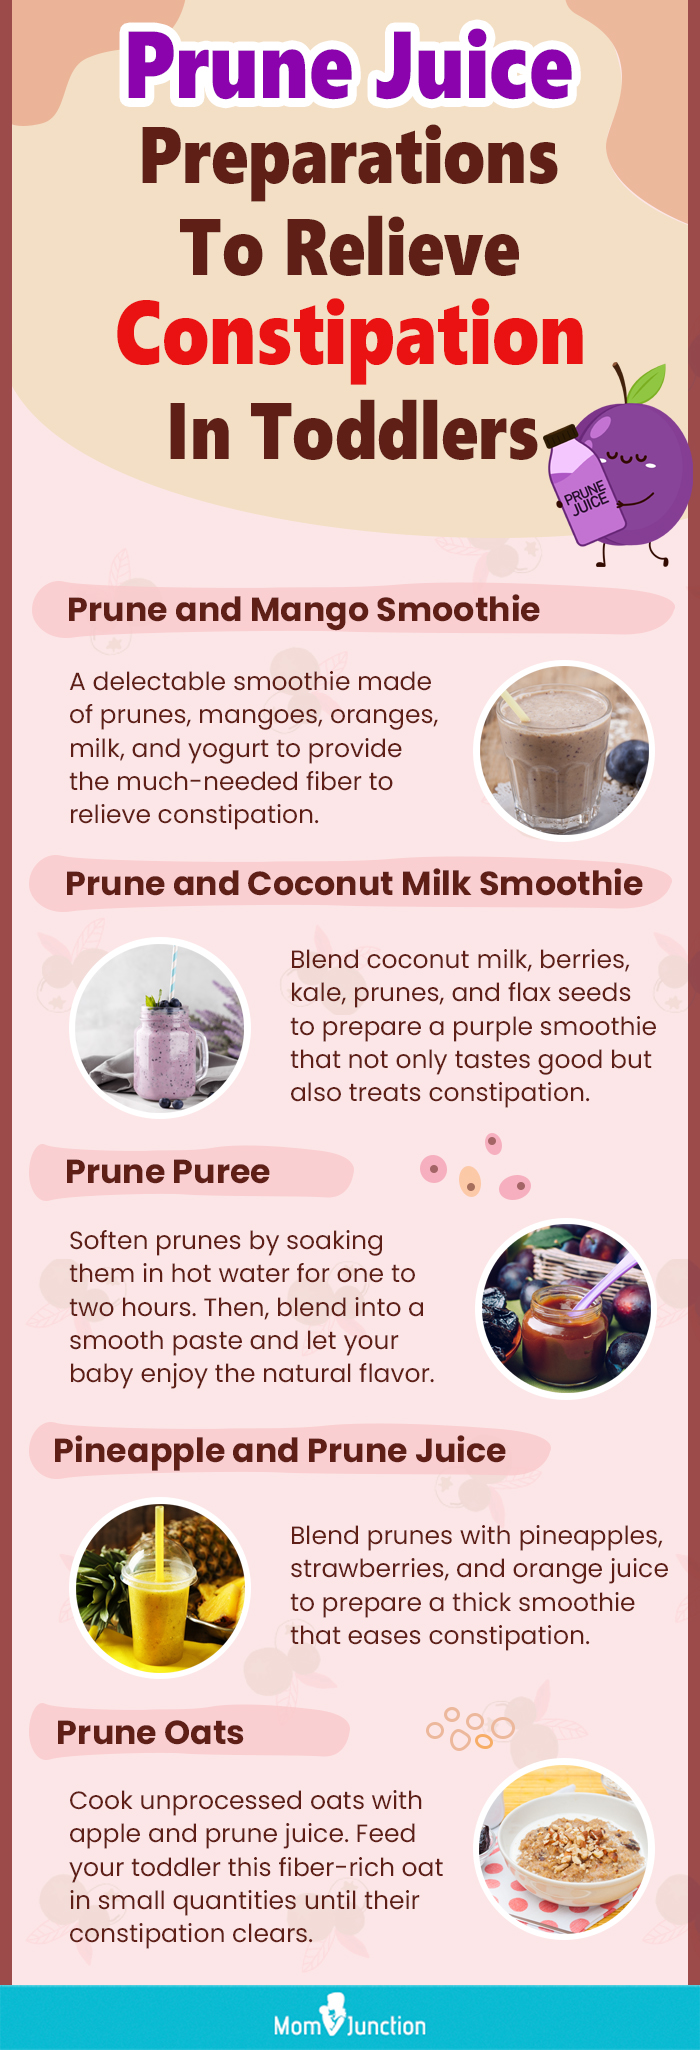 prune juice preparations to relieve constipation in toddlers (infographic)